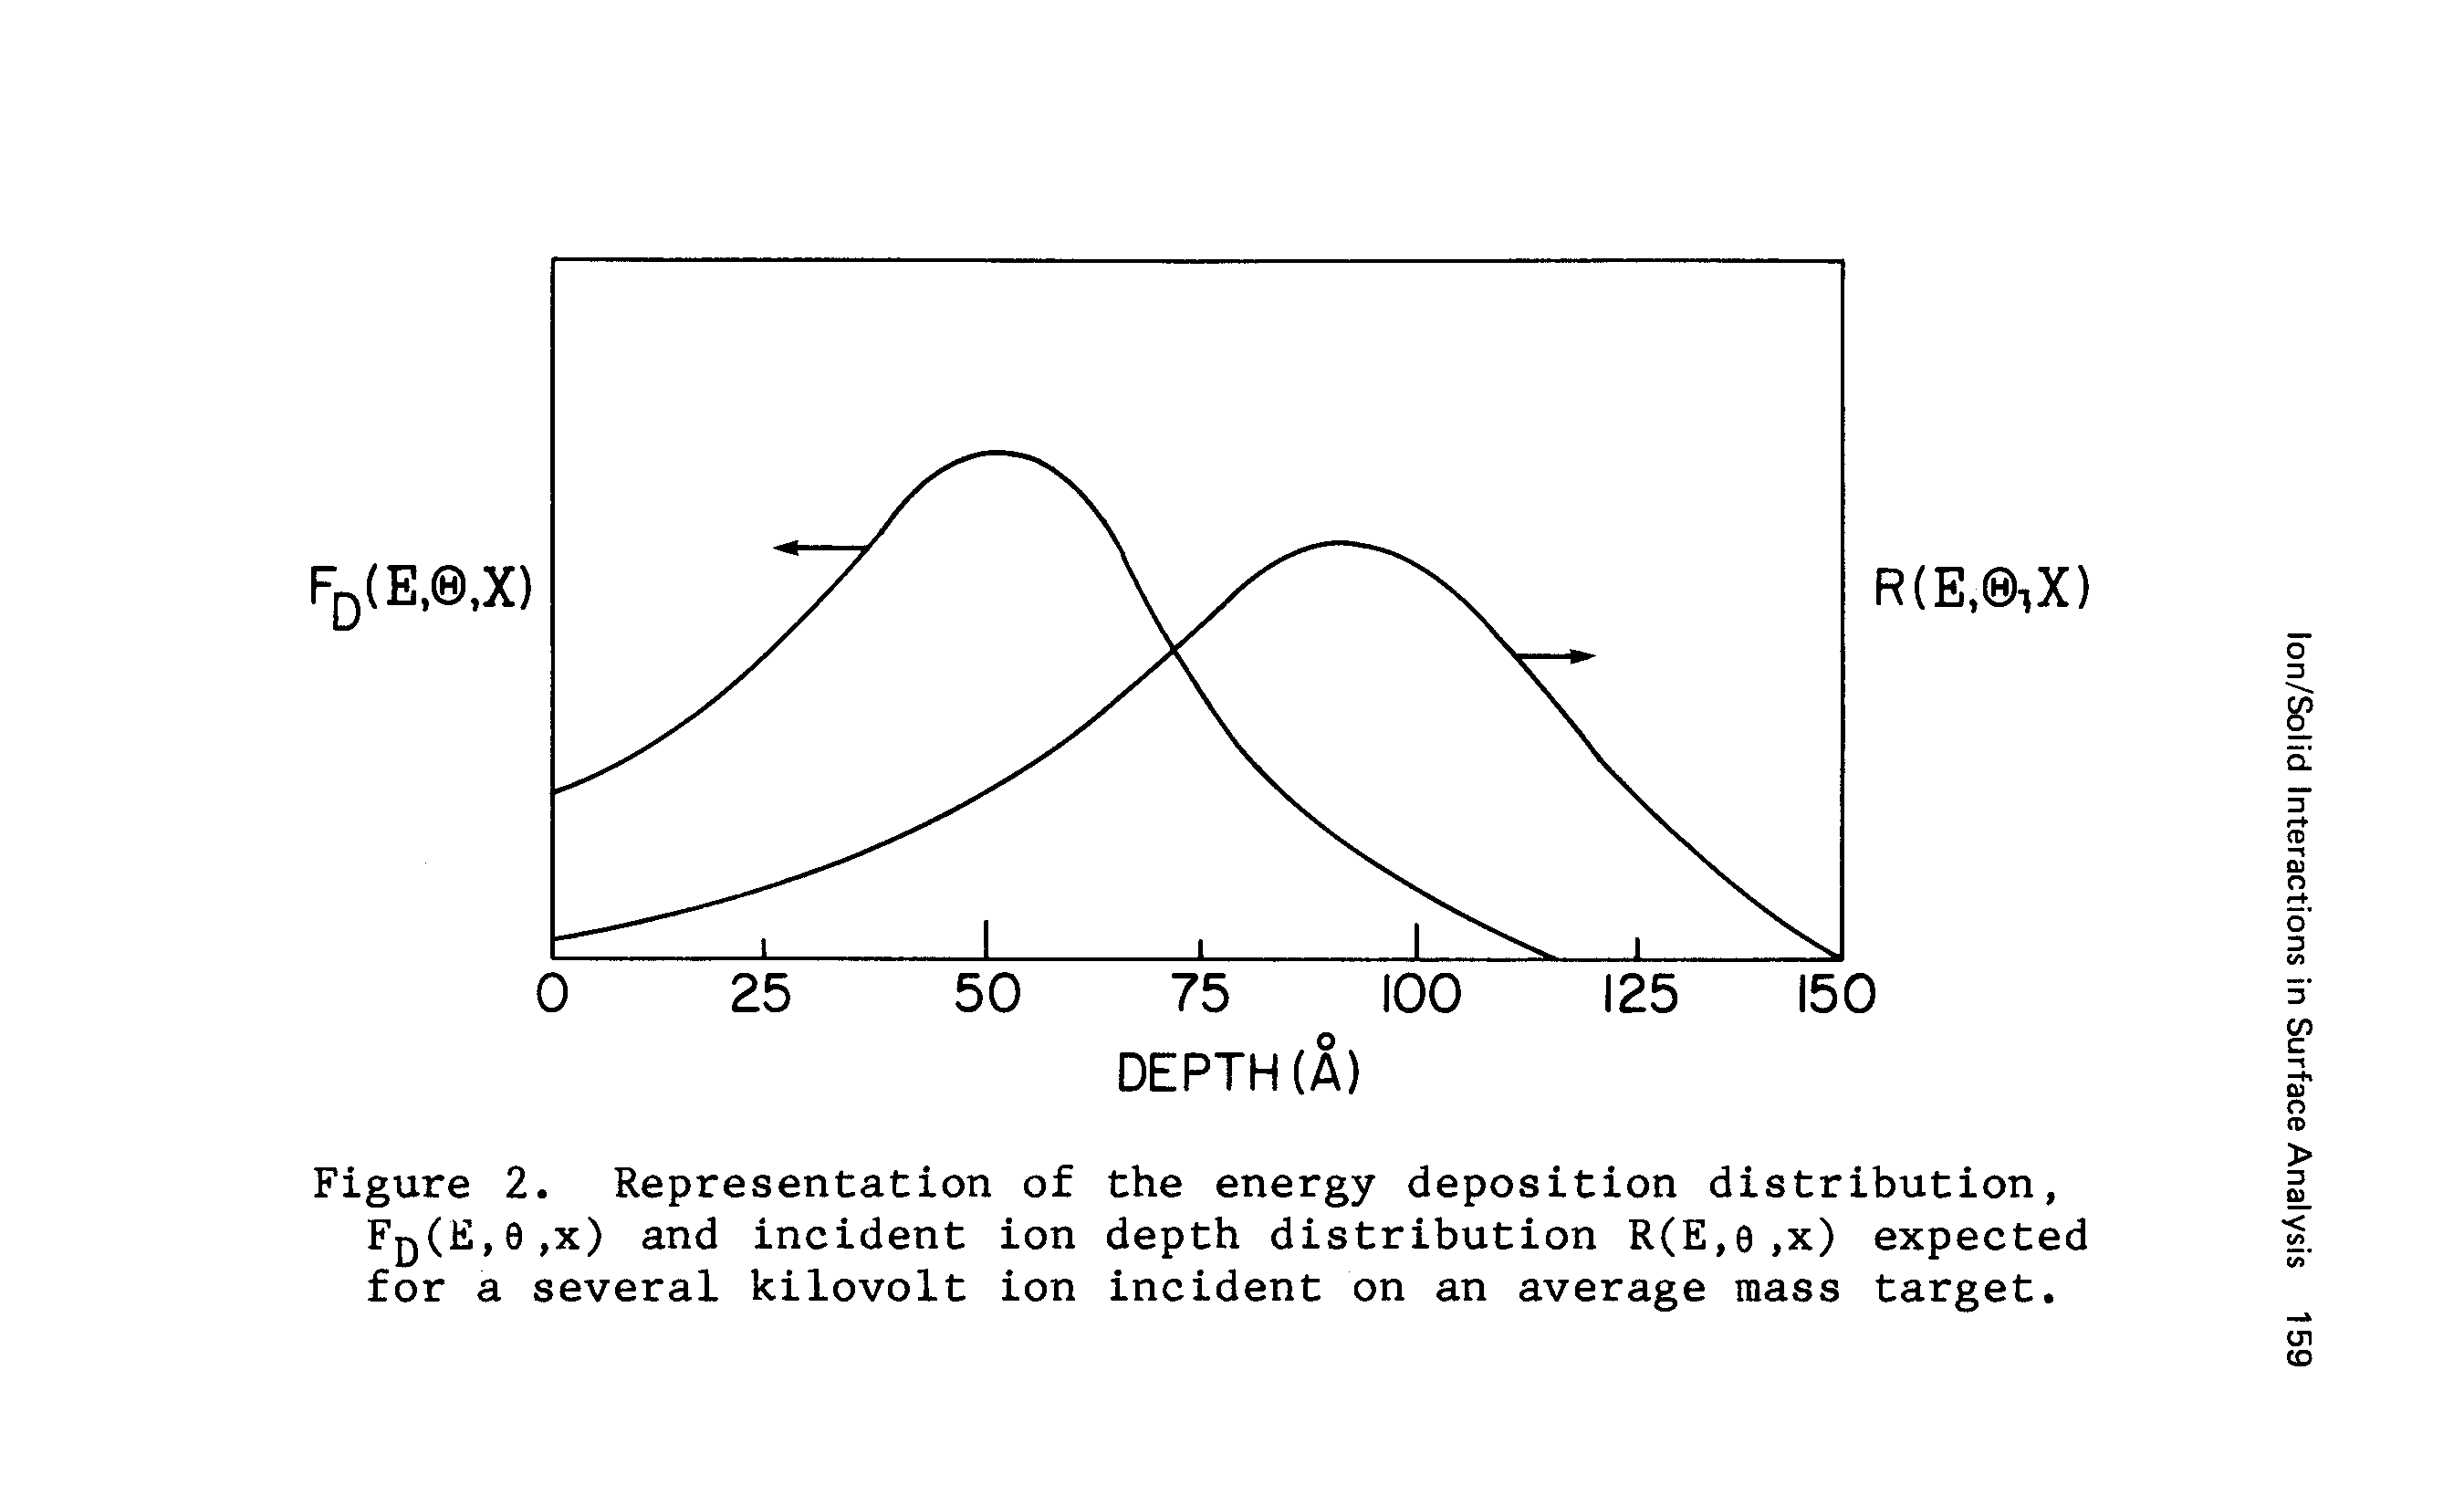 Figure 2. Representation of the energy deposition distribution, Fq(E,9,x) and incident ion depth distribution R(E,e,x) expected for a several kilovolt ion incident on an average mass target.